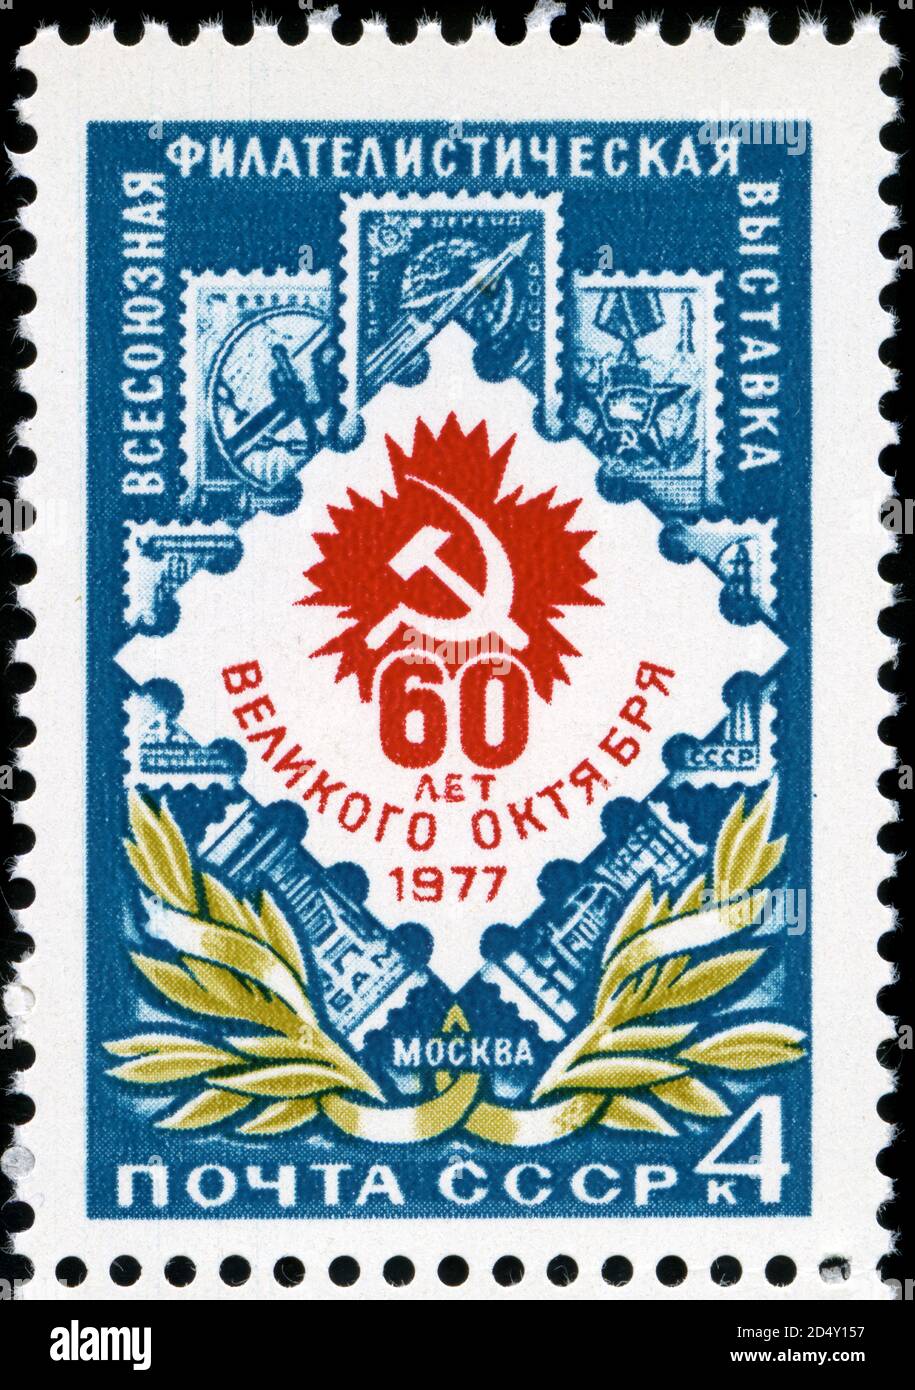 Postage stamp from the Soviet Union in the Stamp Exhibitions series issued in 1977 Stock Photo